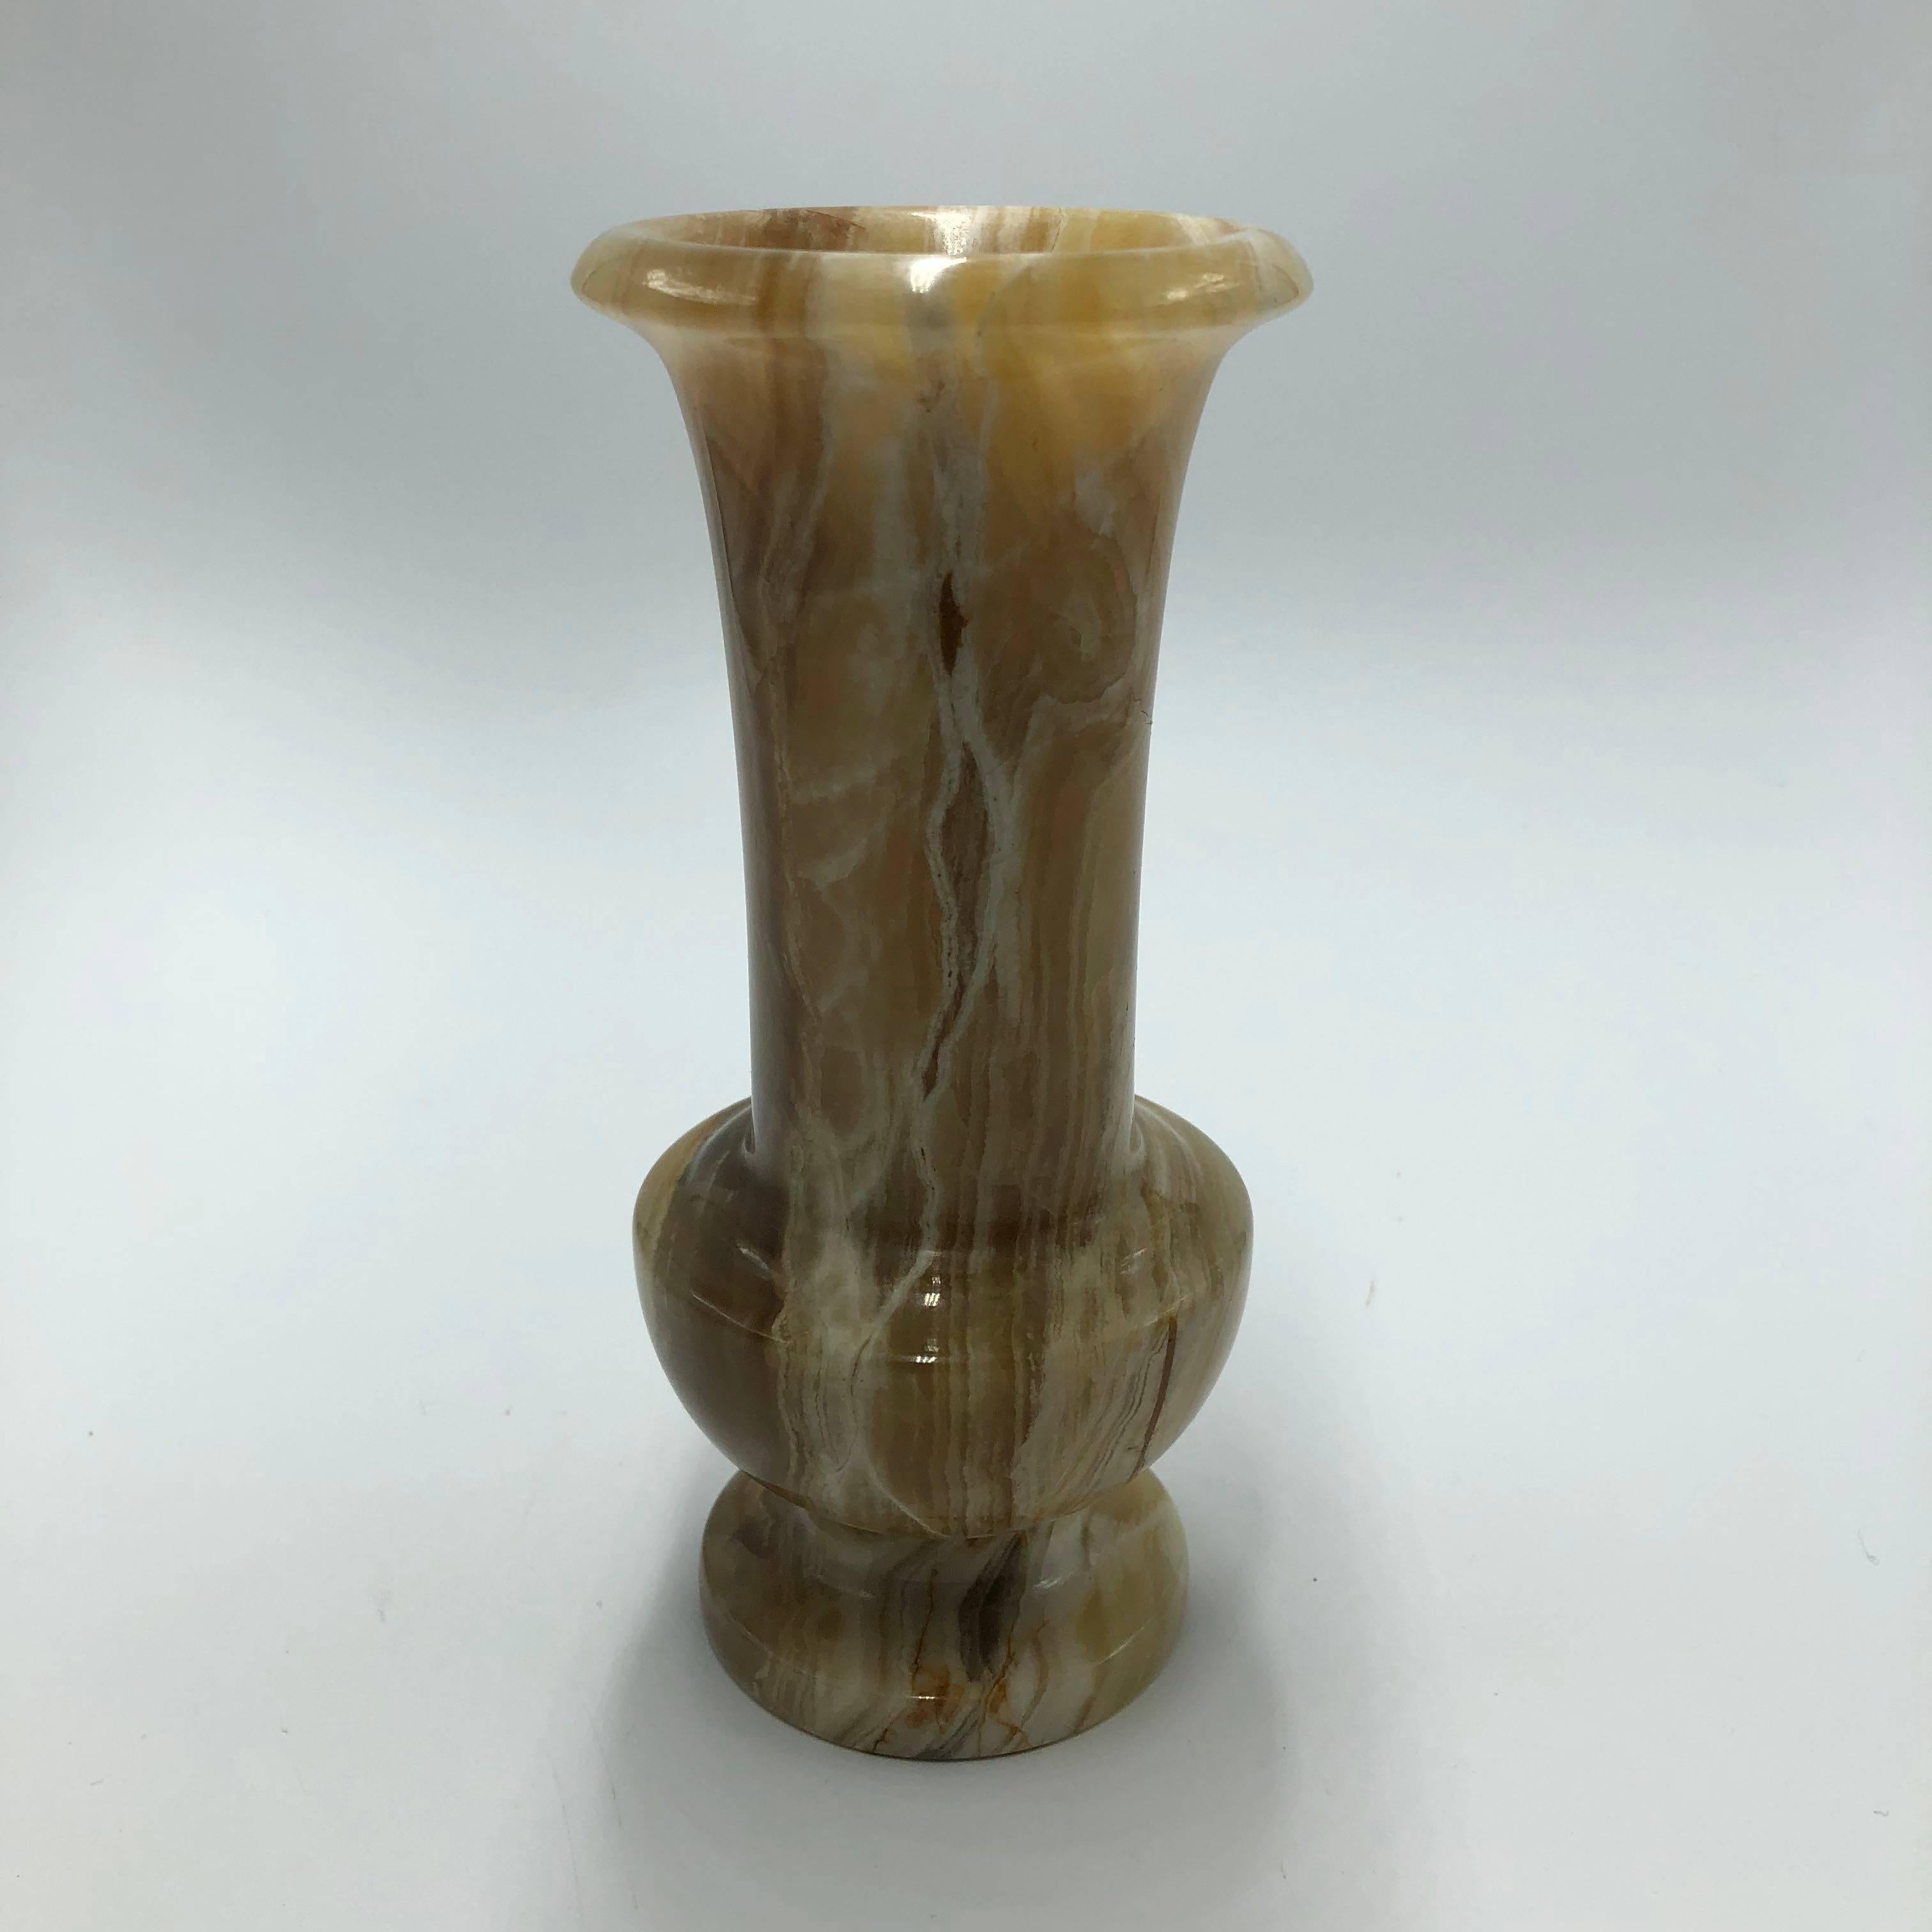 A beautiful, small vintage Italian champagne onyx marble urn shaped vase.
   